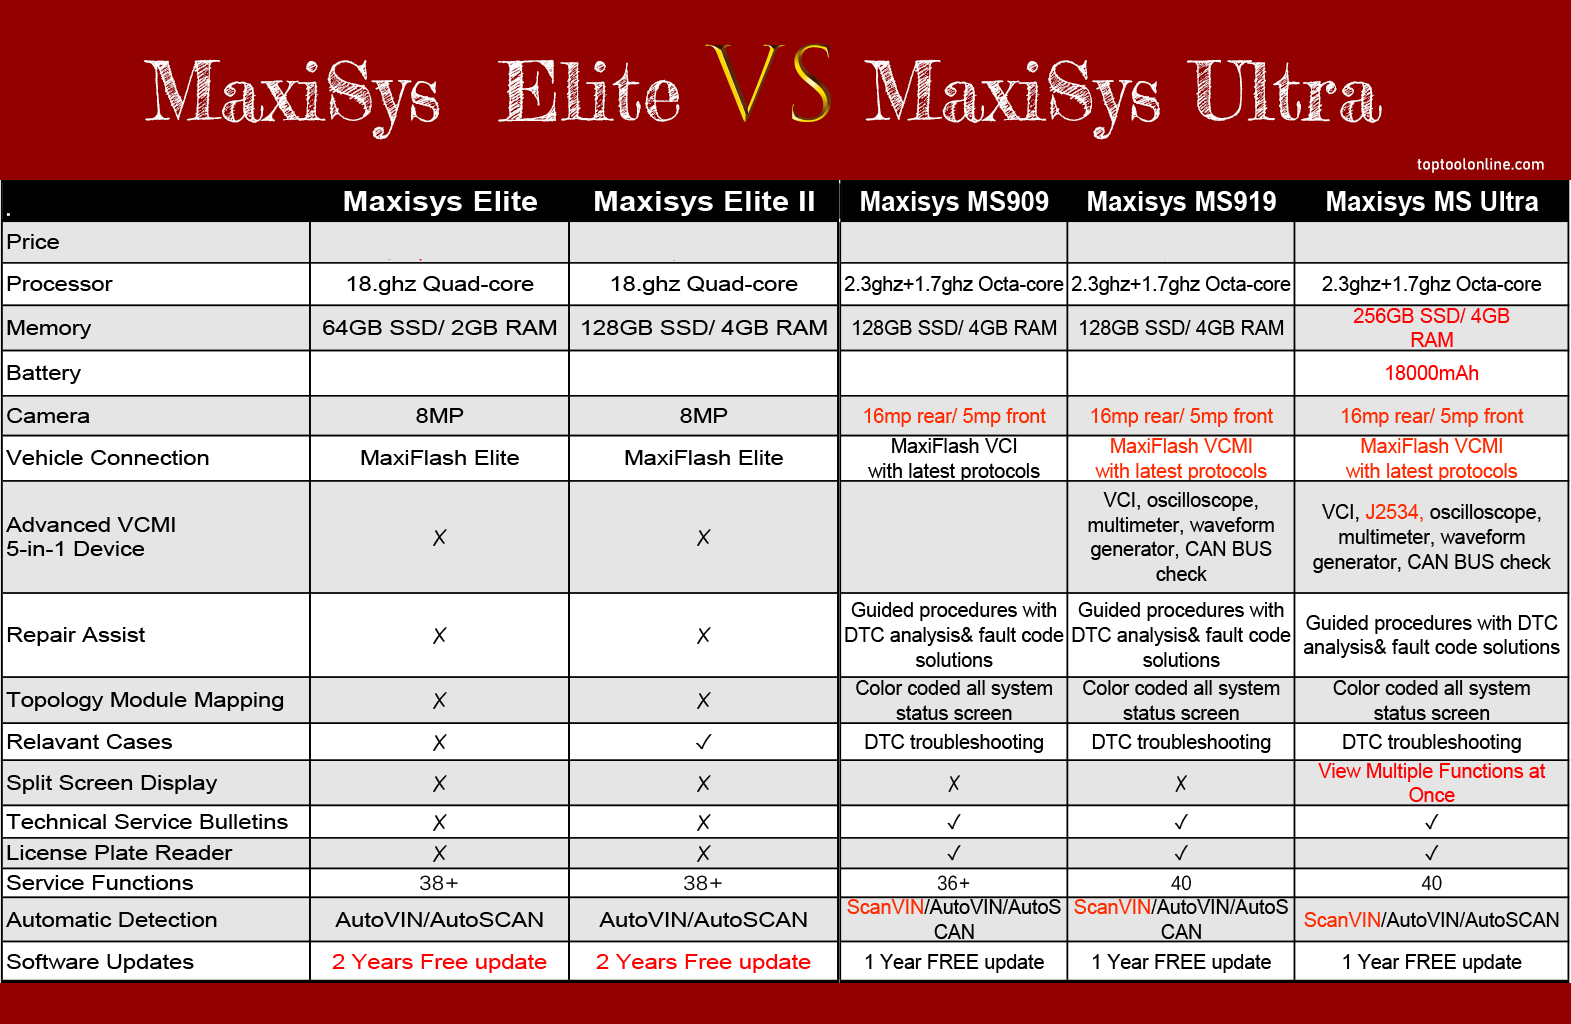 Diagram comparing Autel Ultra, MS909, MS919, and Maxisys Elite: A visual representation showcasing the detailed comparison of features, specifications, and performance between Autel Ultra, MS909, MS919, and Maxisys Elite diagnostic scanners.